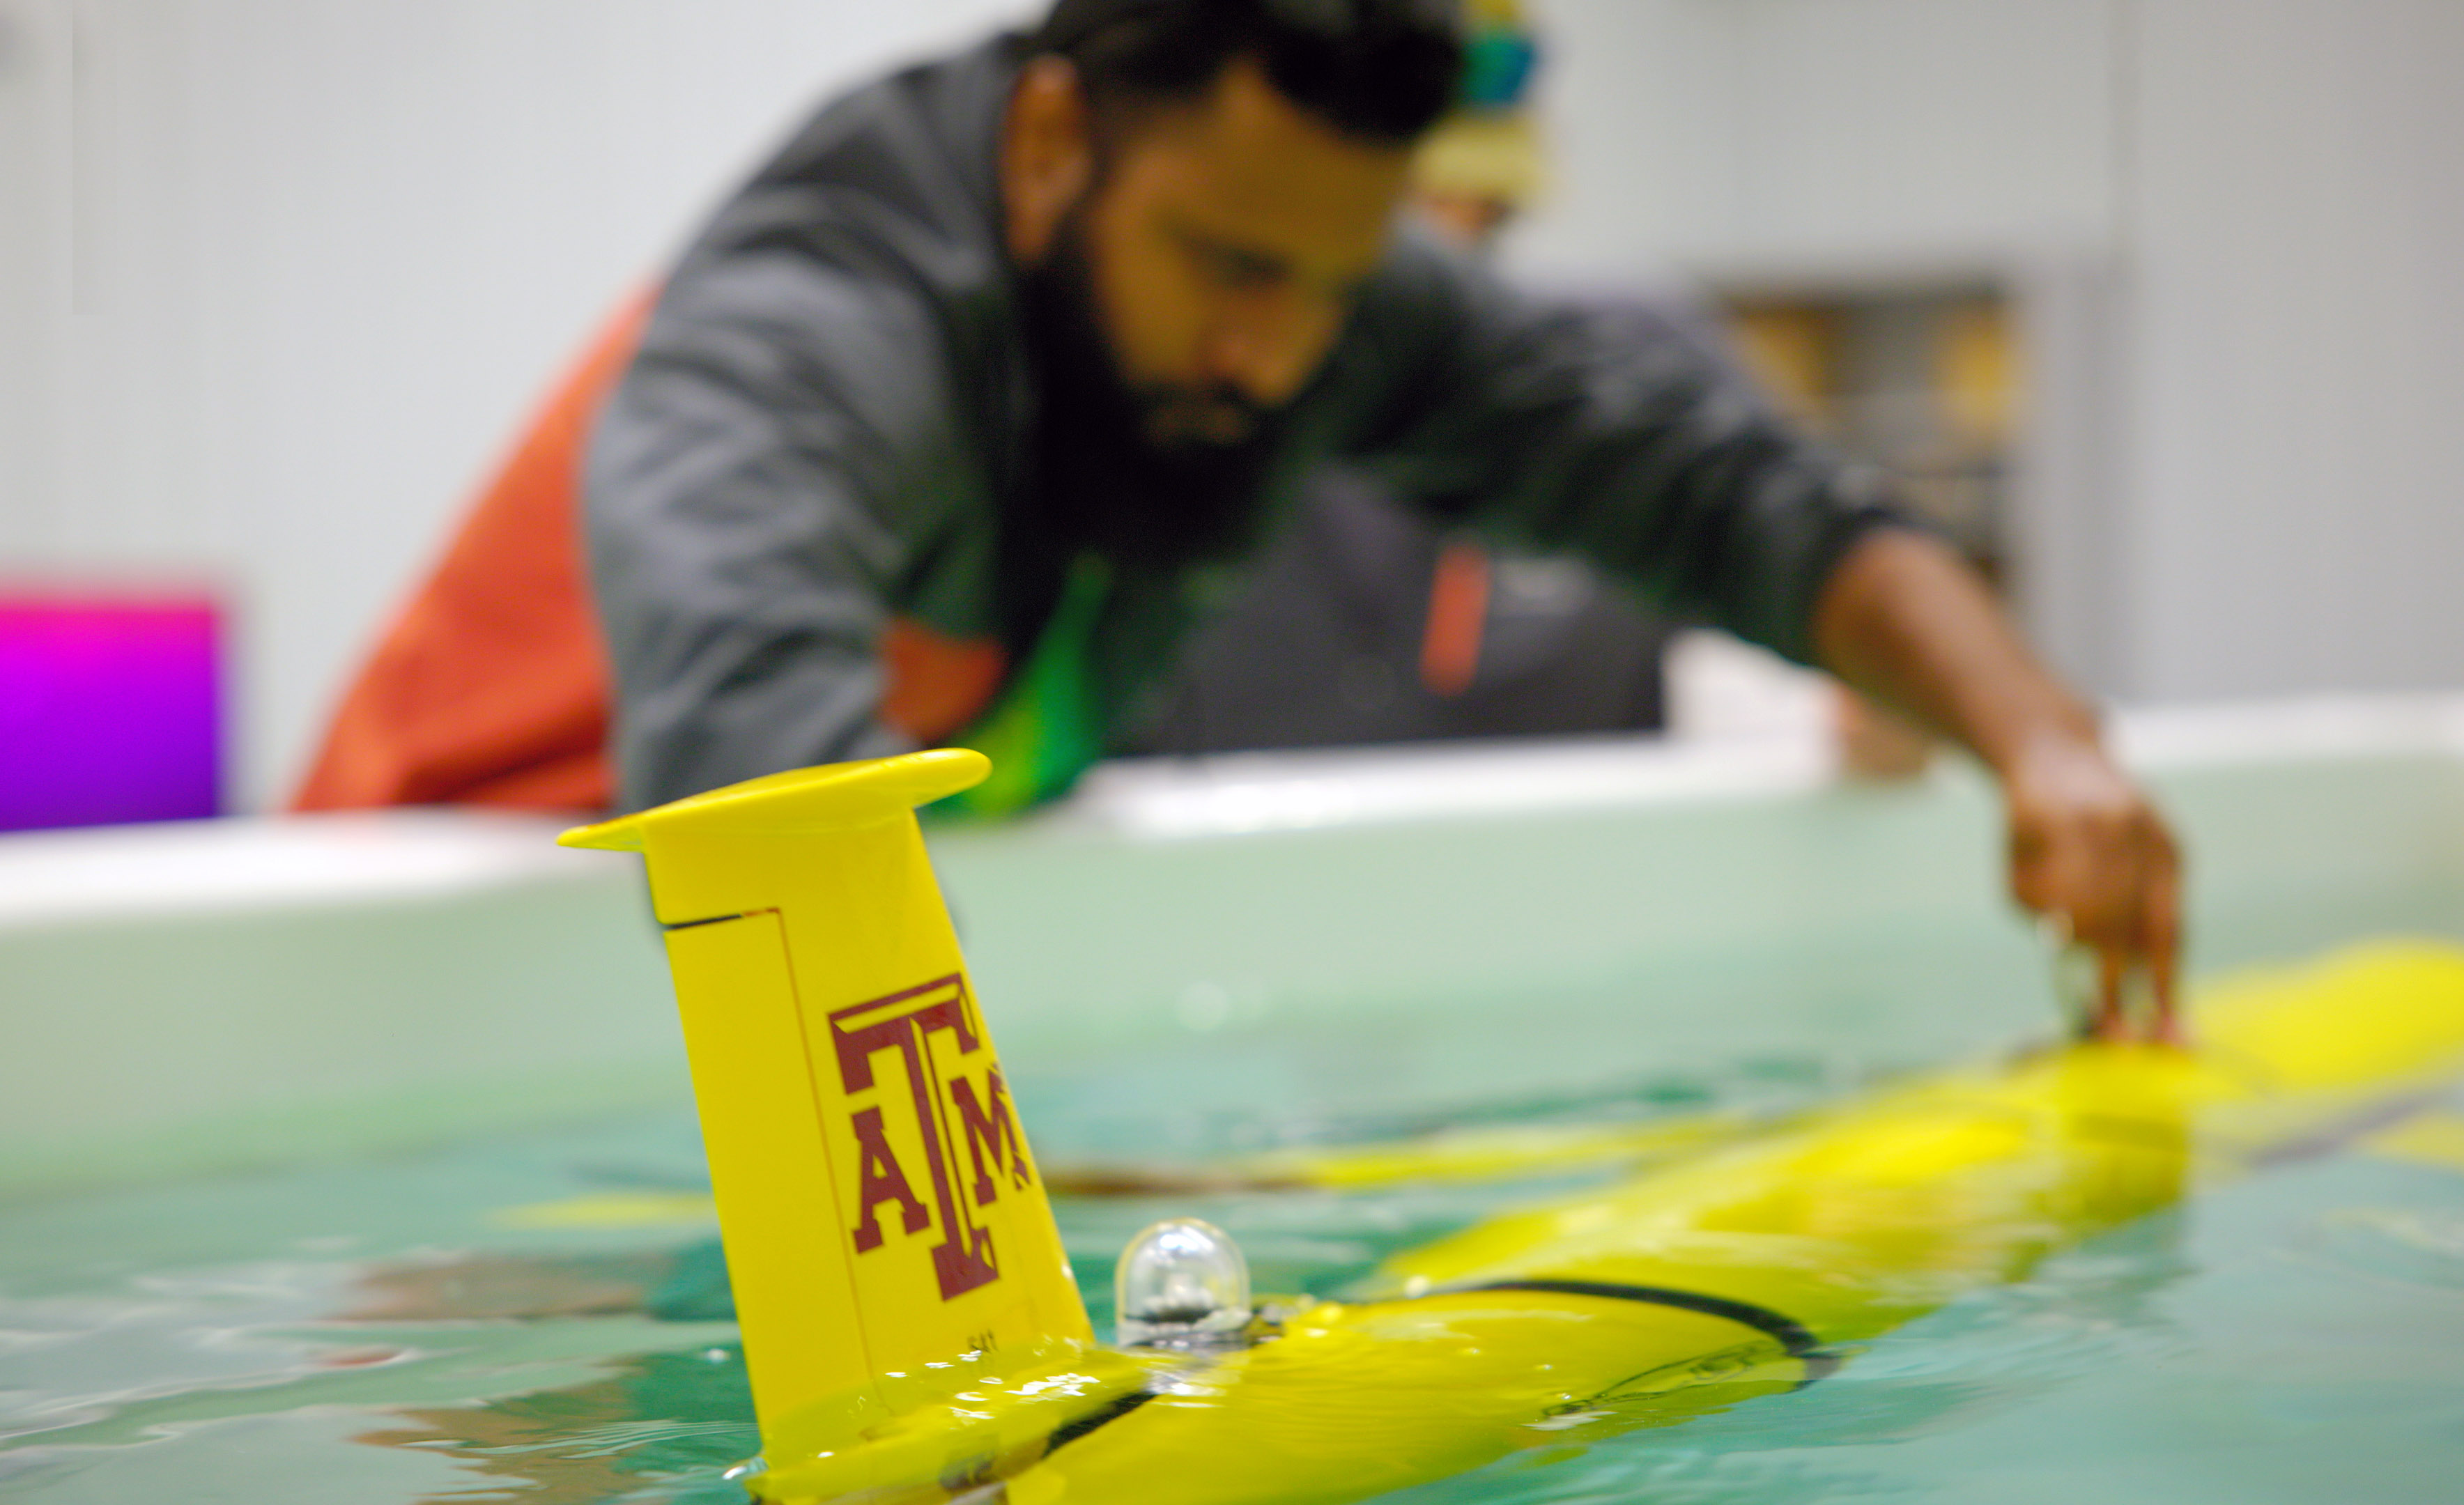 Postdoctoral researcher Sakib Mahmud  observes a yellow glider featuring a maroon Texas A&amp;M University logo as it floats in a pool of water within a Geochemical and Environmental Research Group laboratory